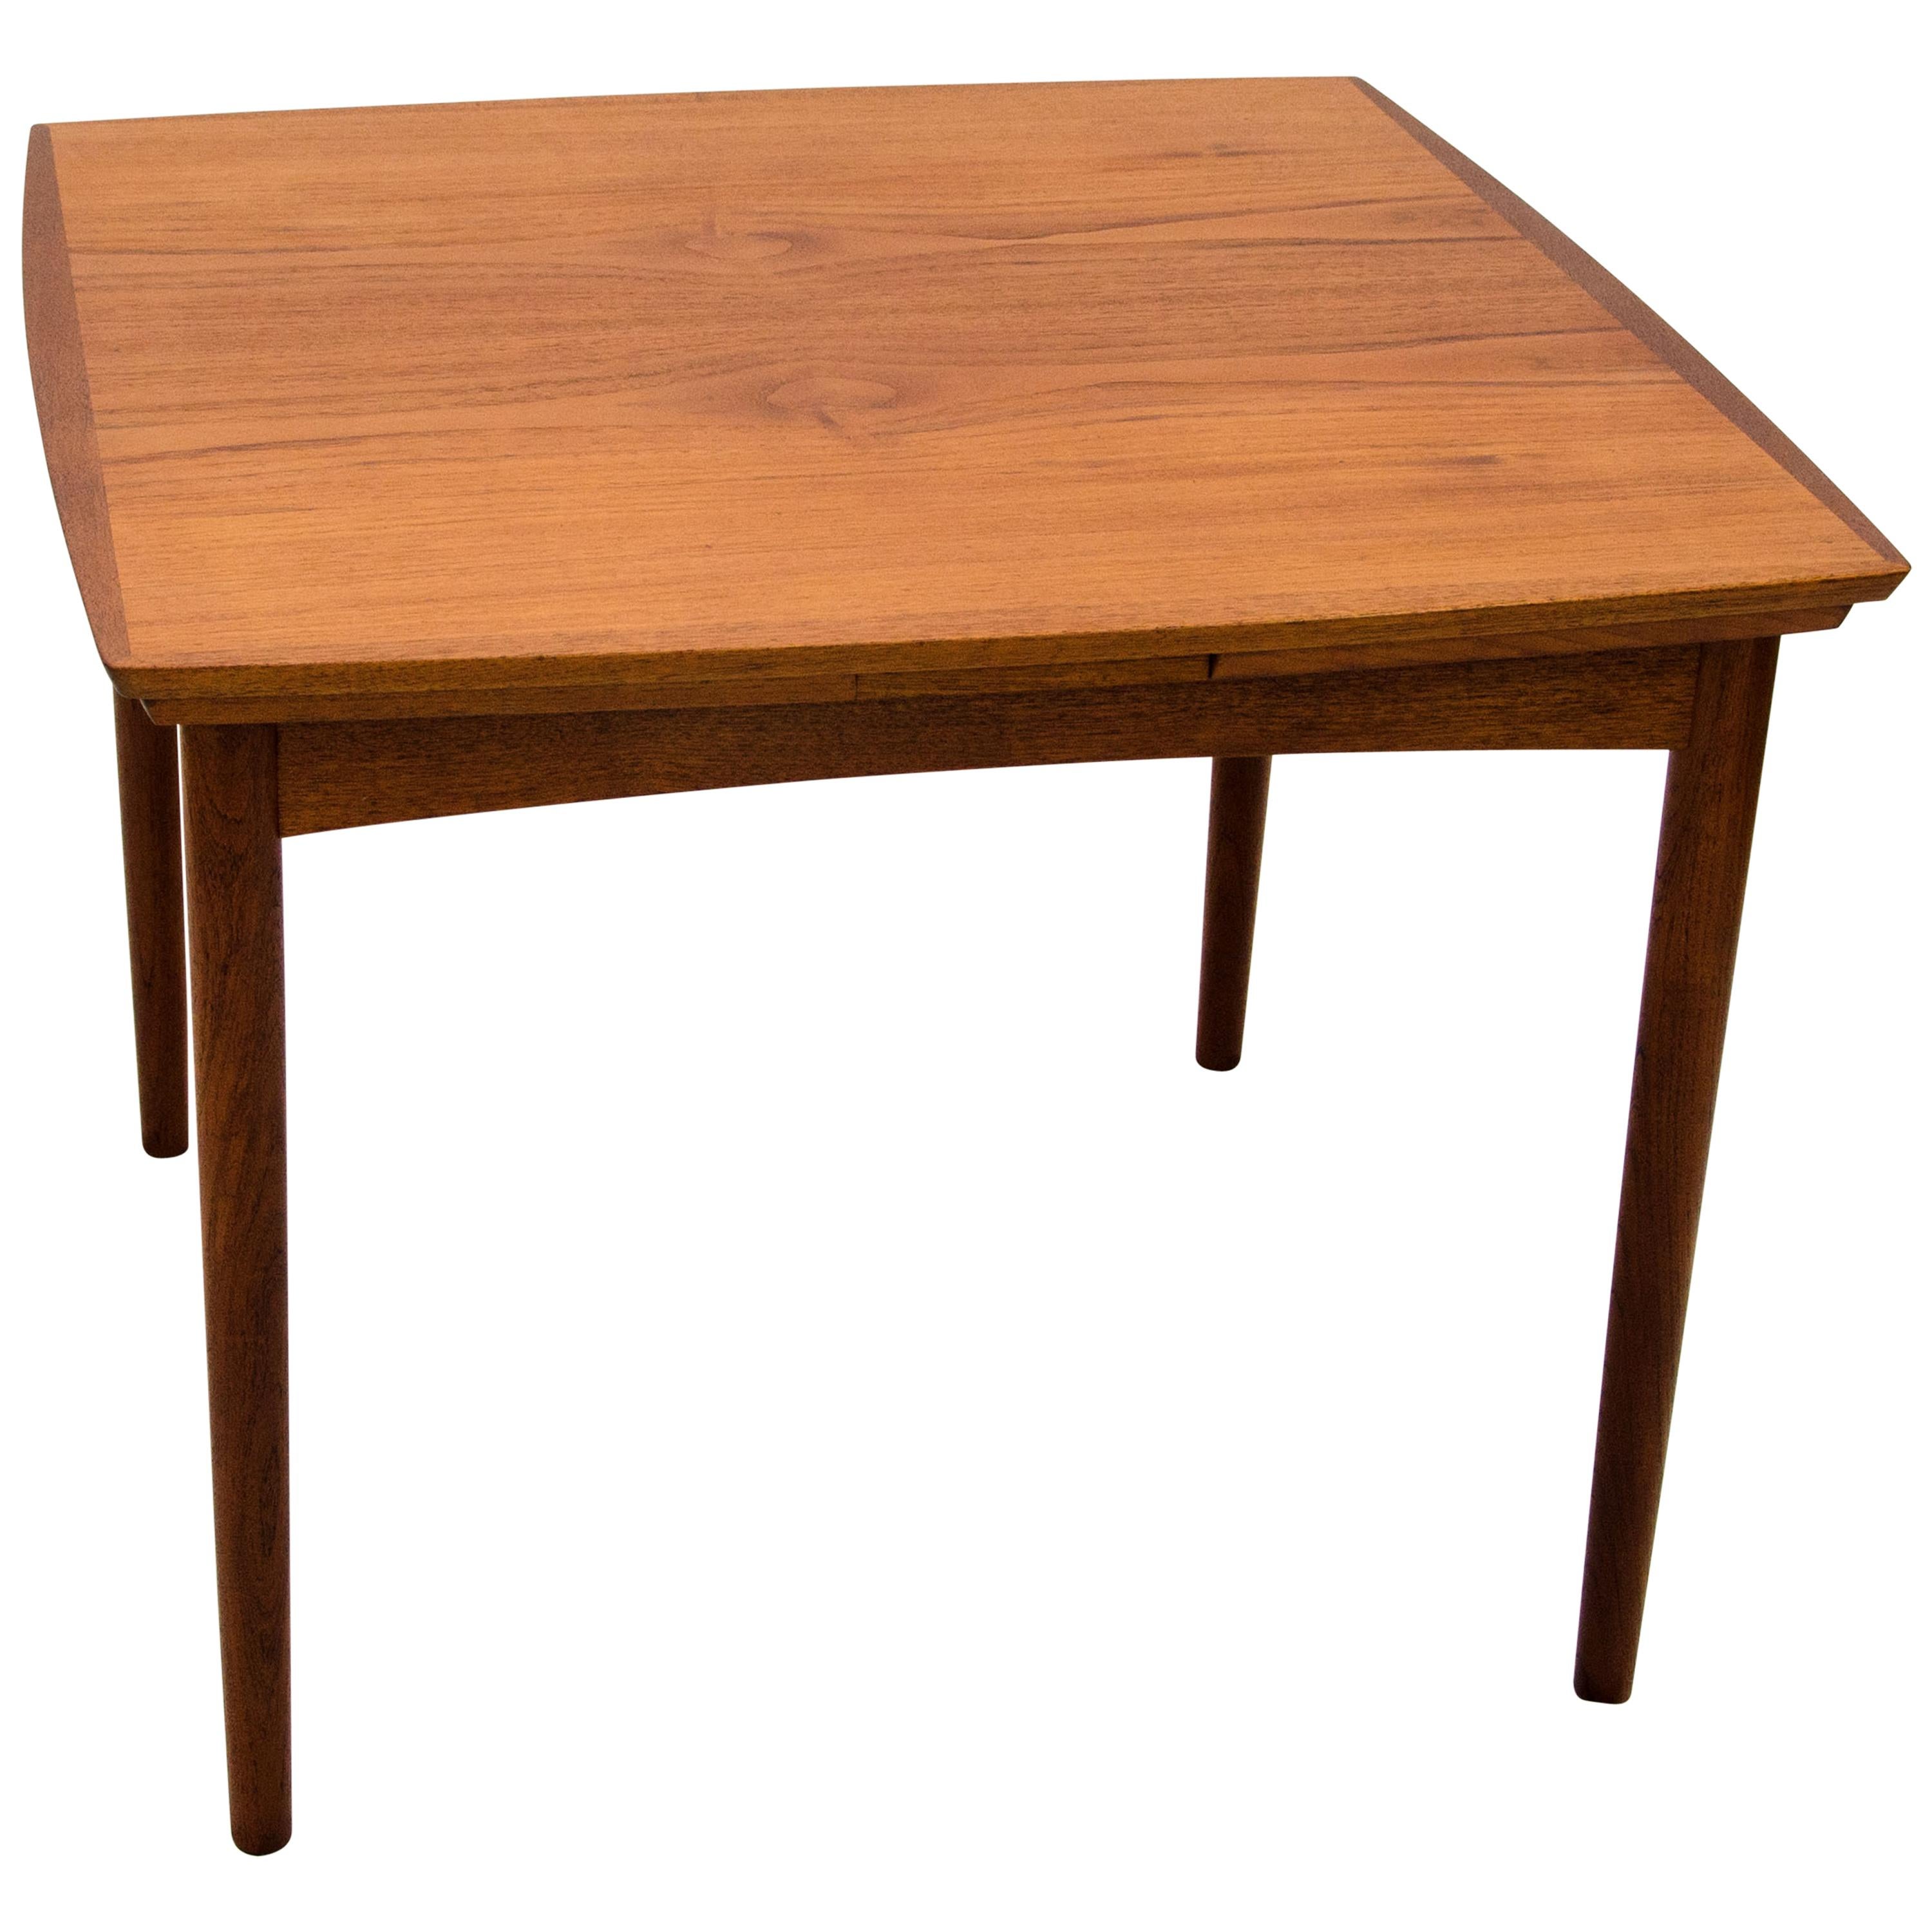 Small Square Danish Teak Draw-Leaf Dining or Breakfast Table